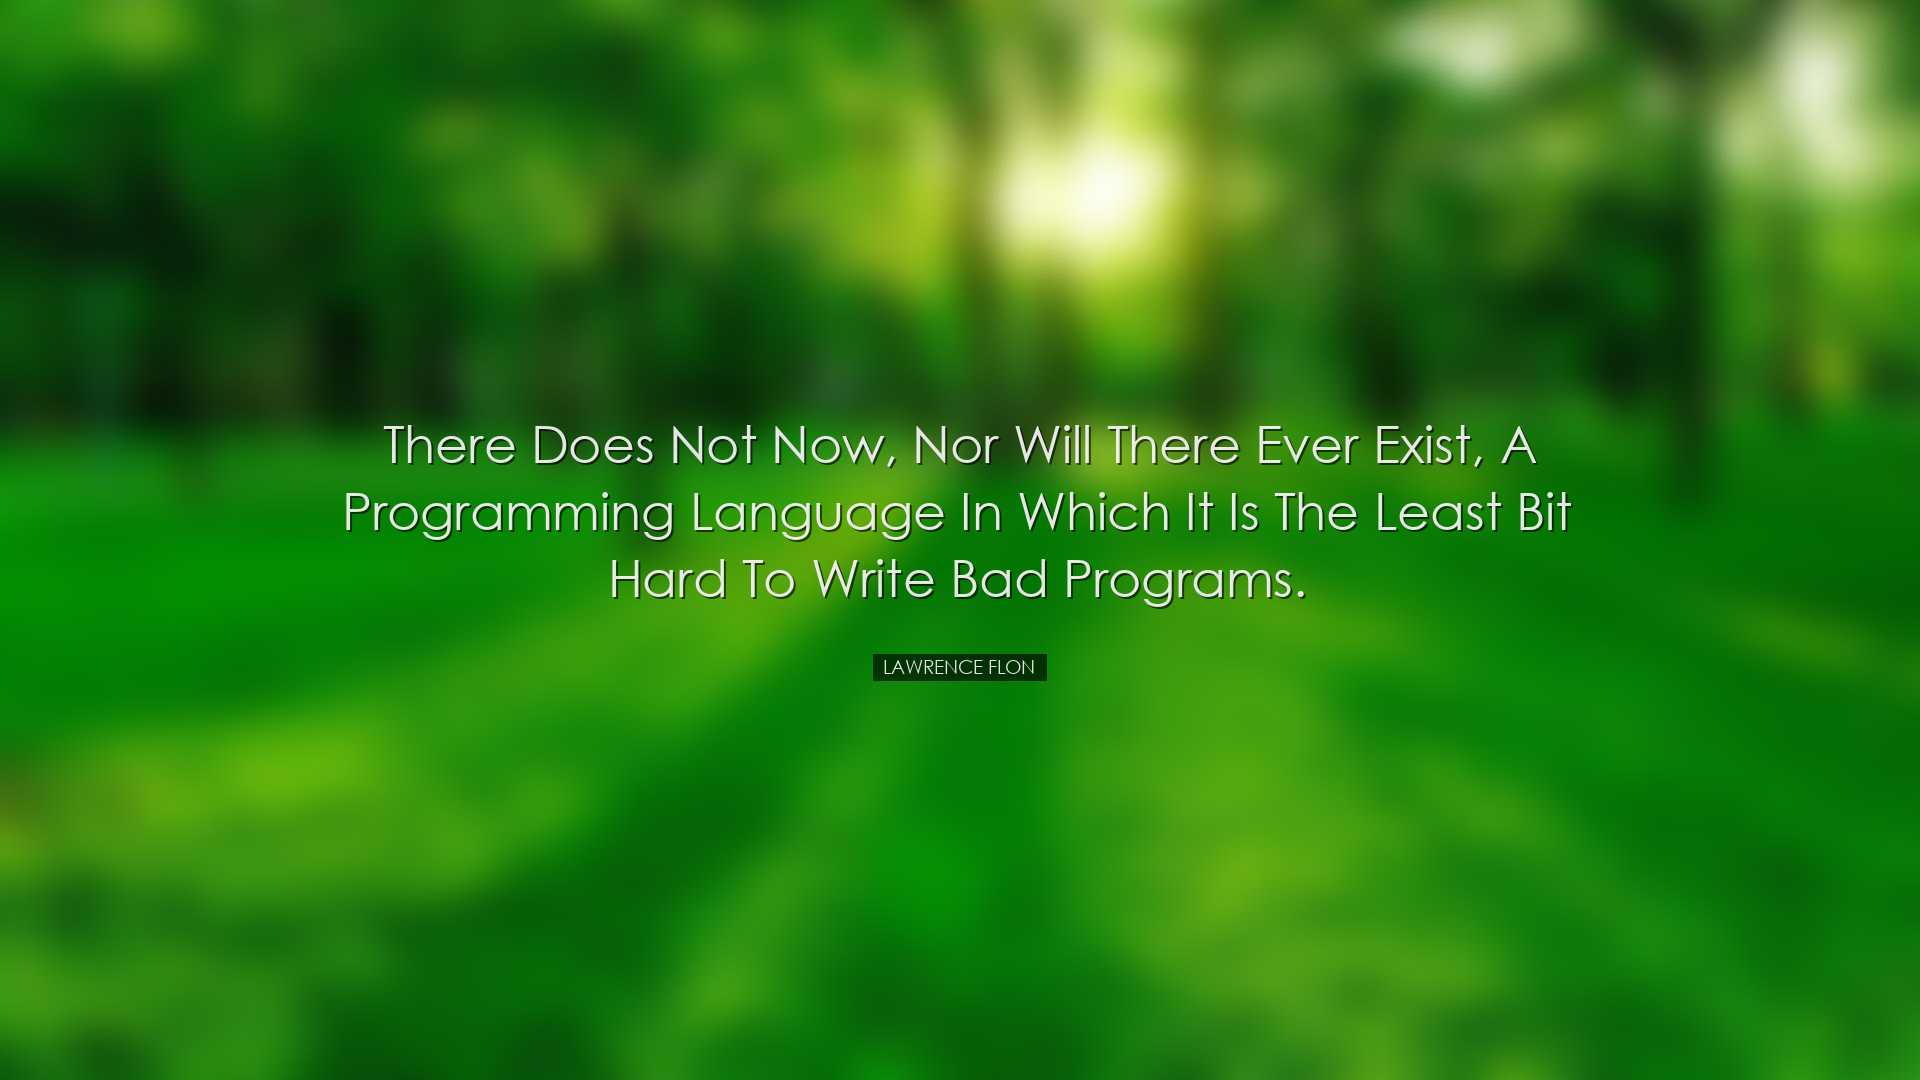 There does not now, nor will there ever exist, a programming langu